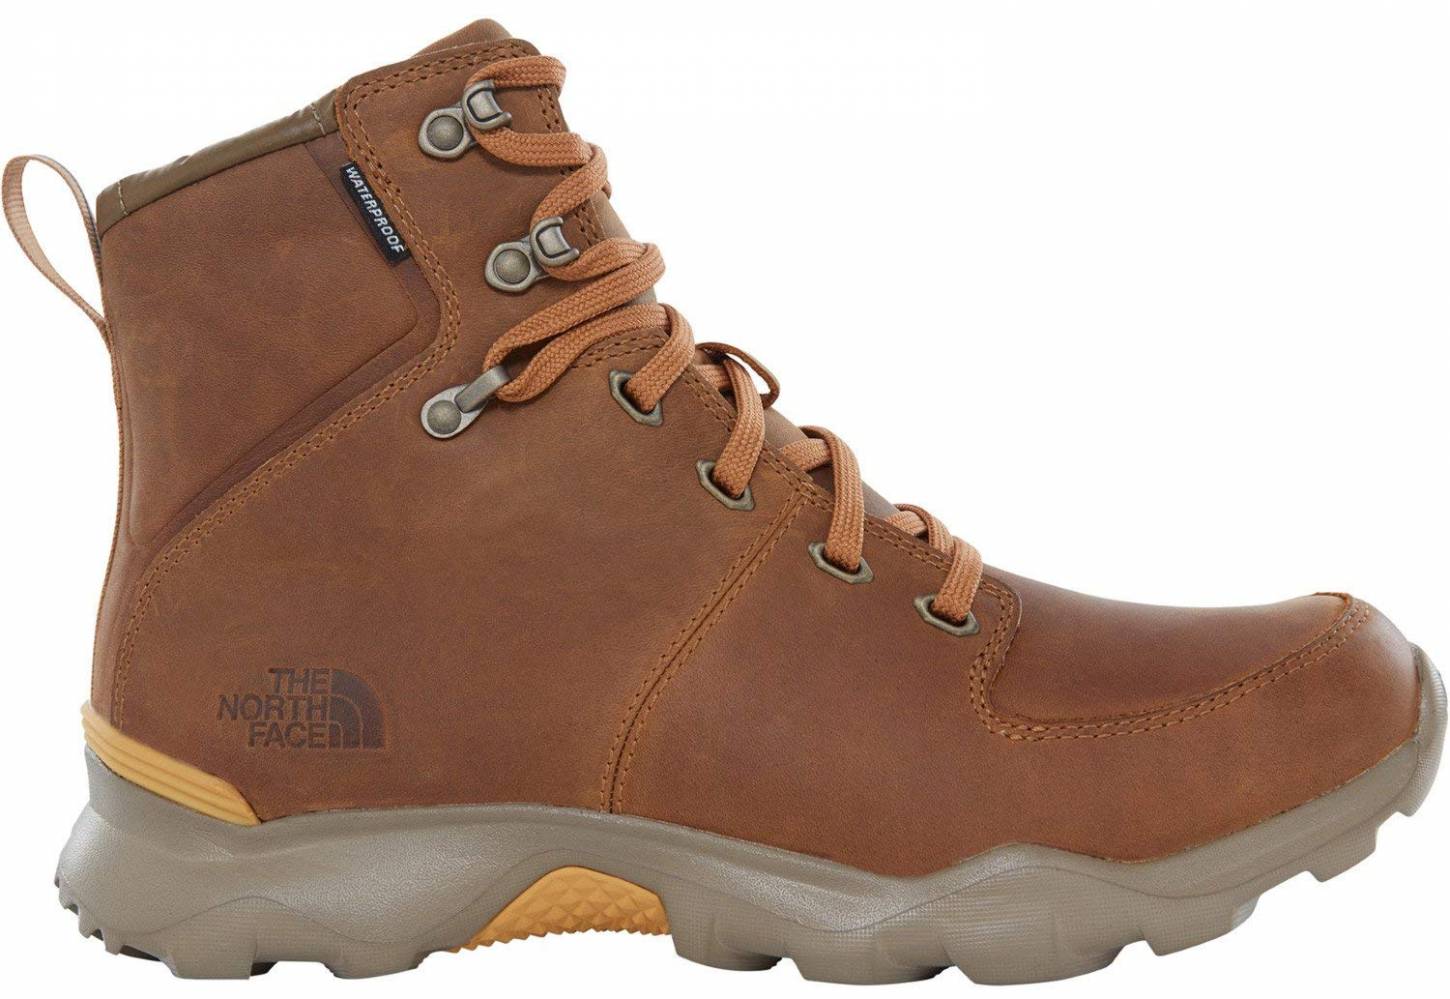 north face men's thermoball shoes